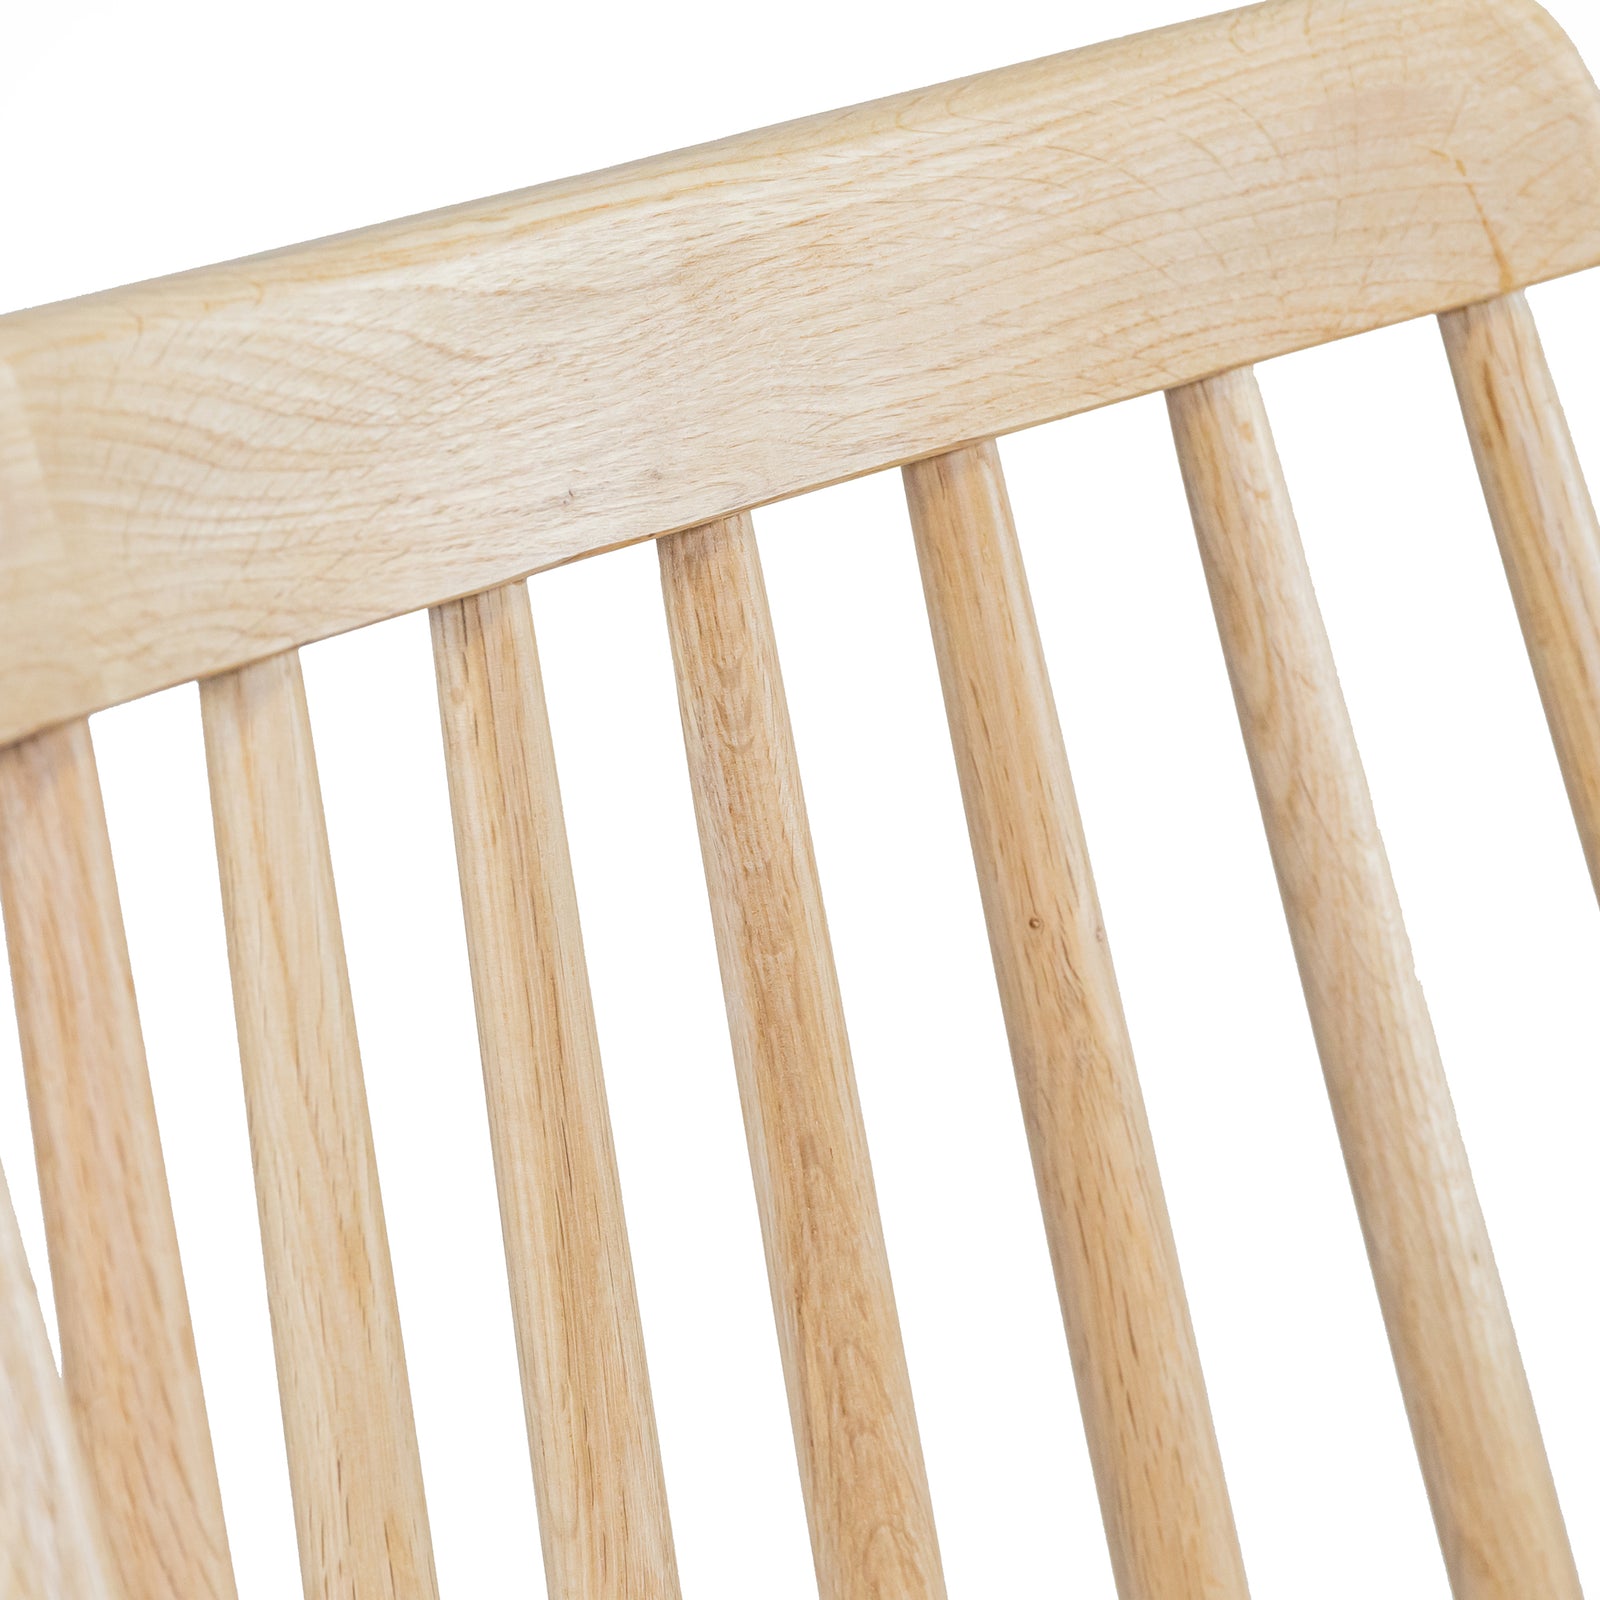 Windsor Chair Natural